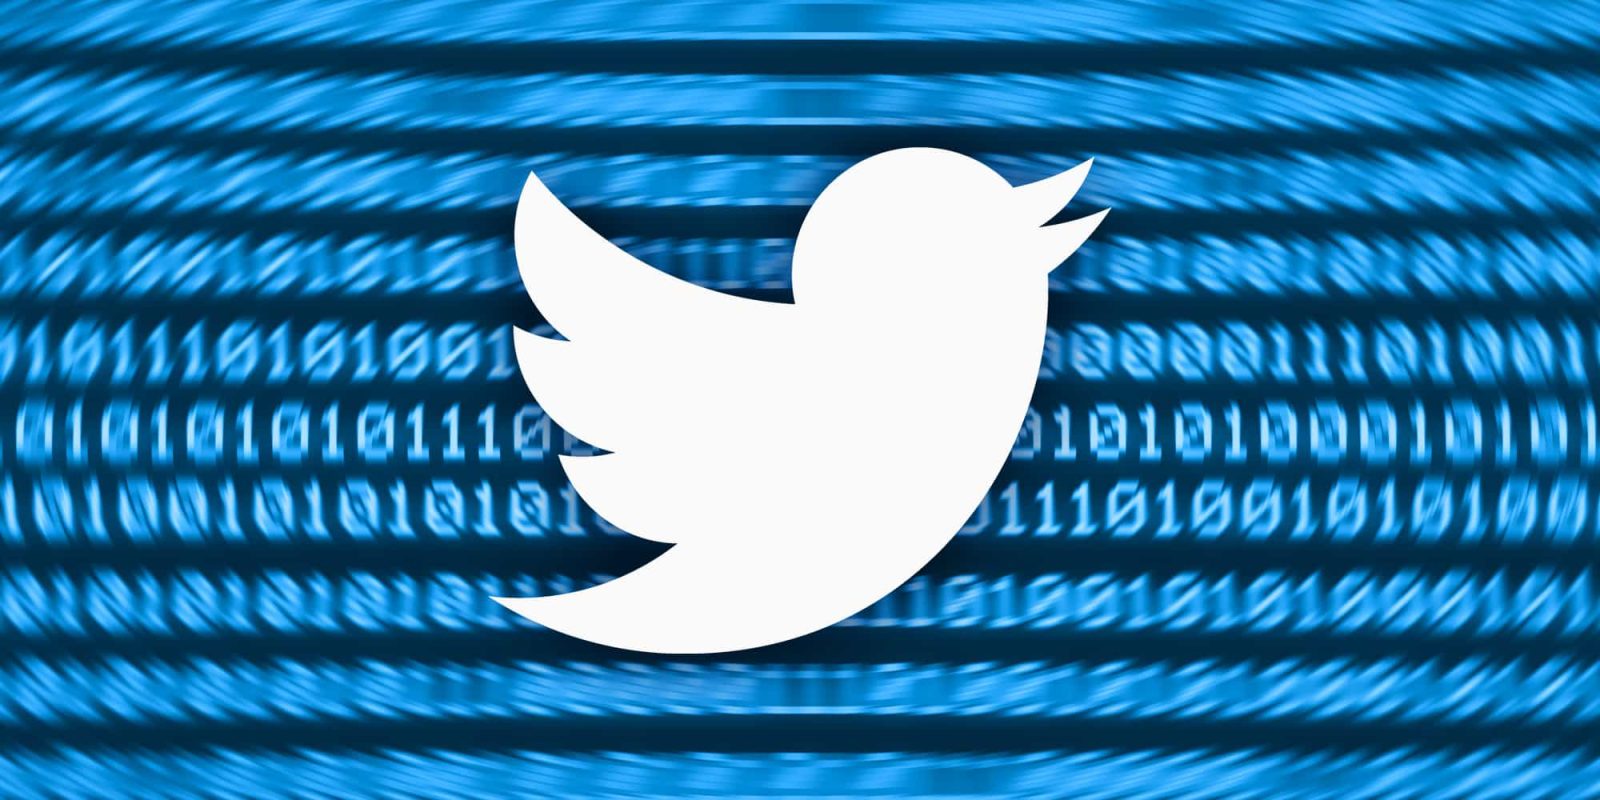 Twitter data breach | Twitter logo on ones and zeroes like code